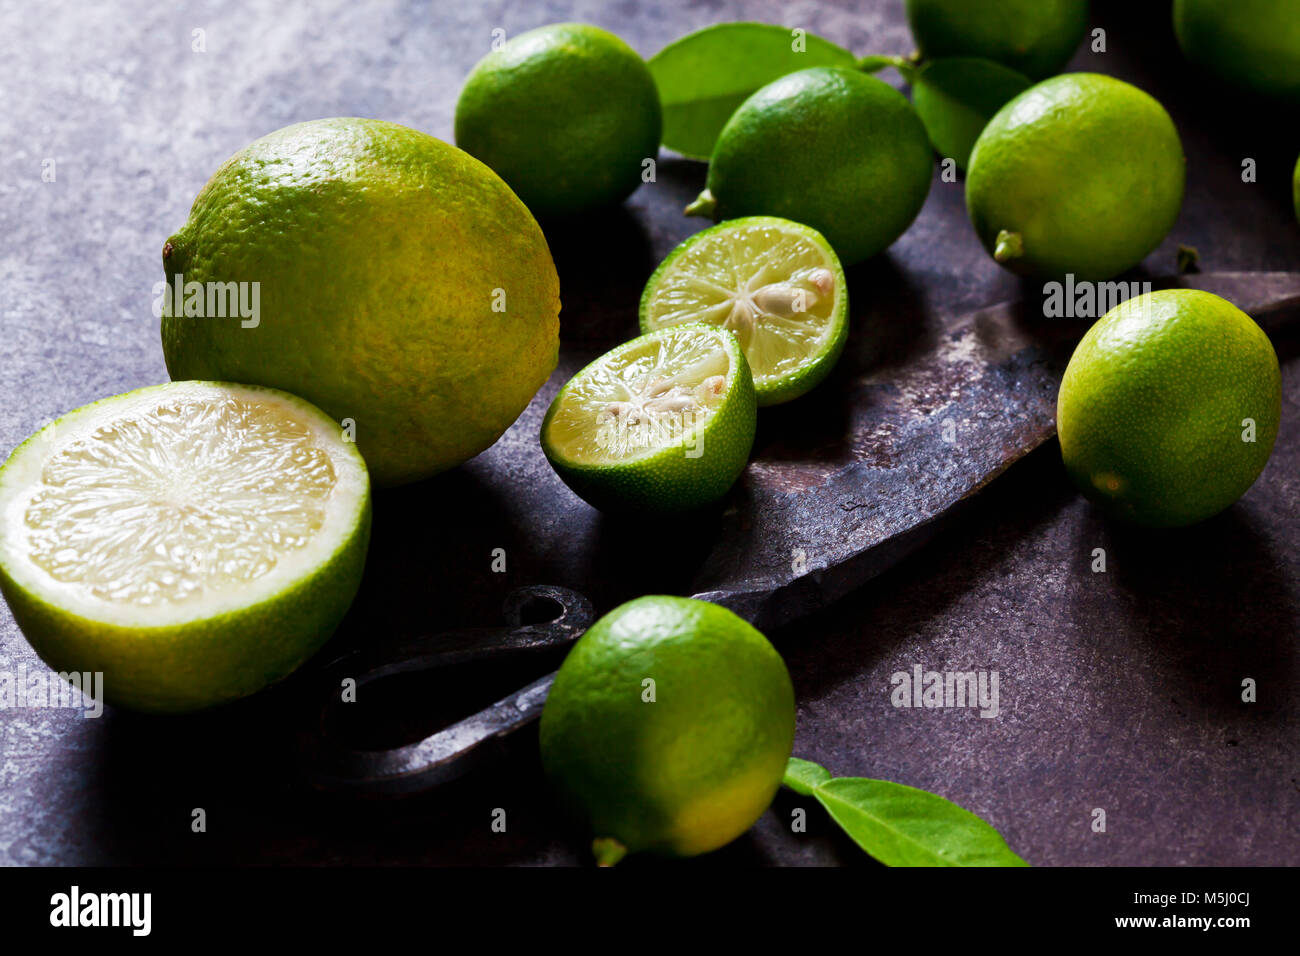 Sliced and whole limequats, limes, leaves and old knife on rusty ground Stock Photo